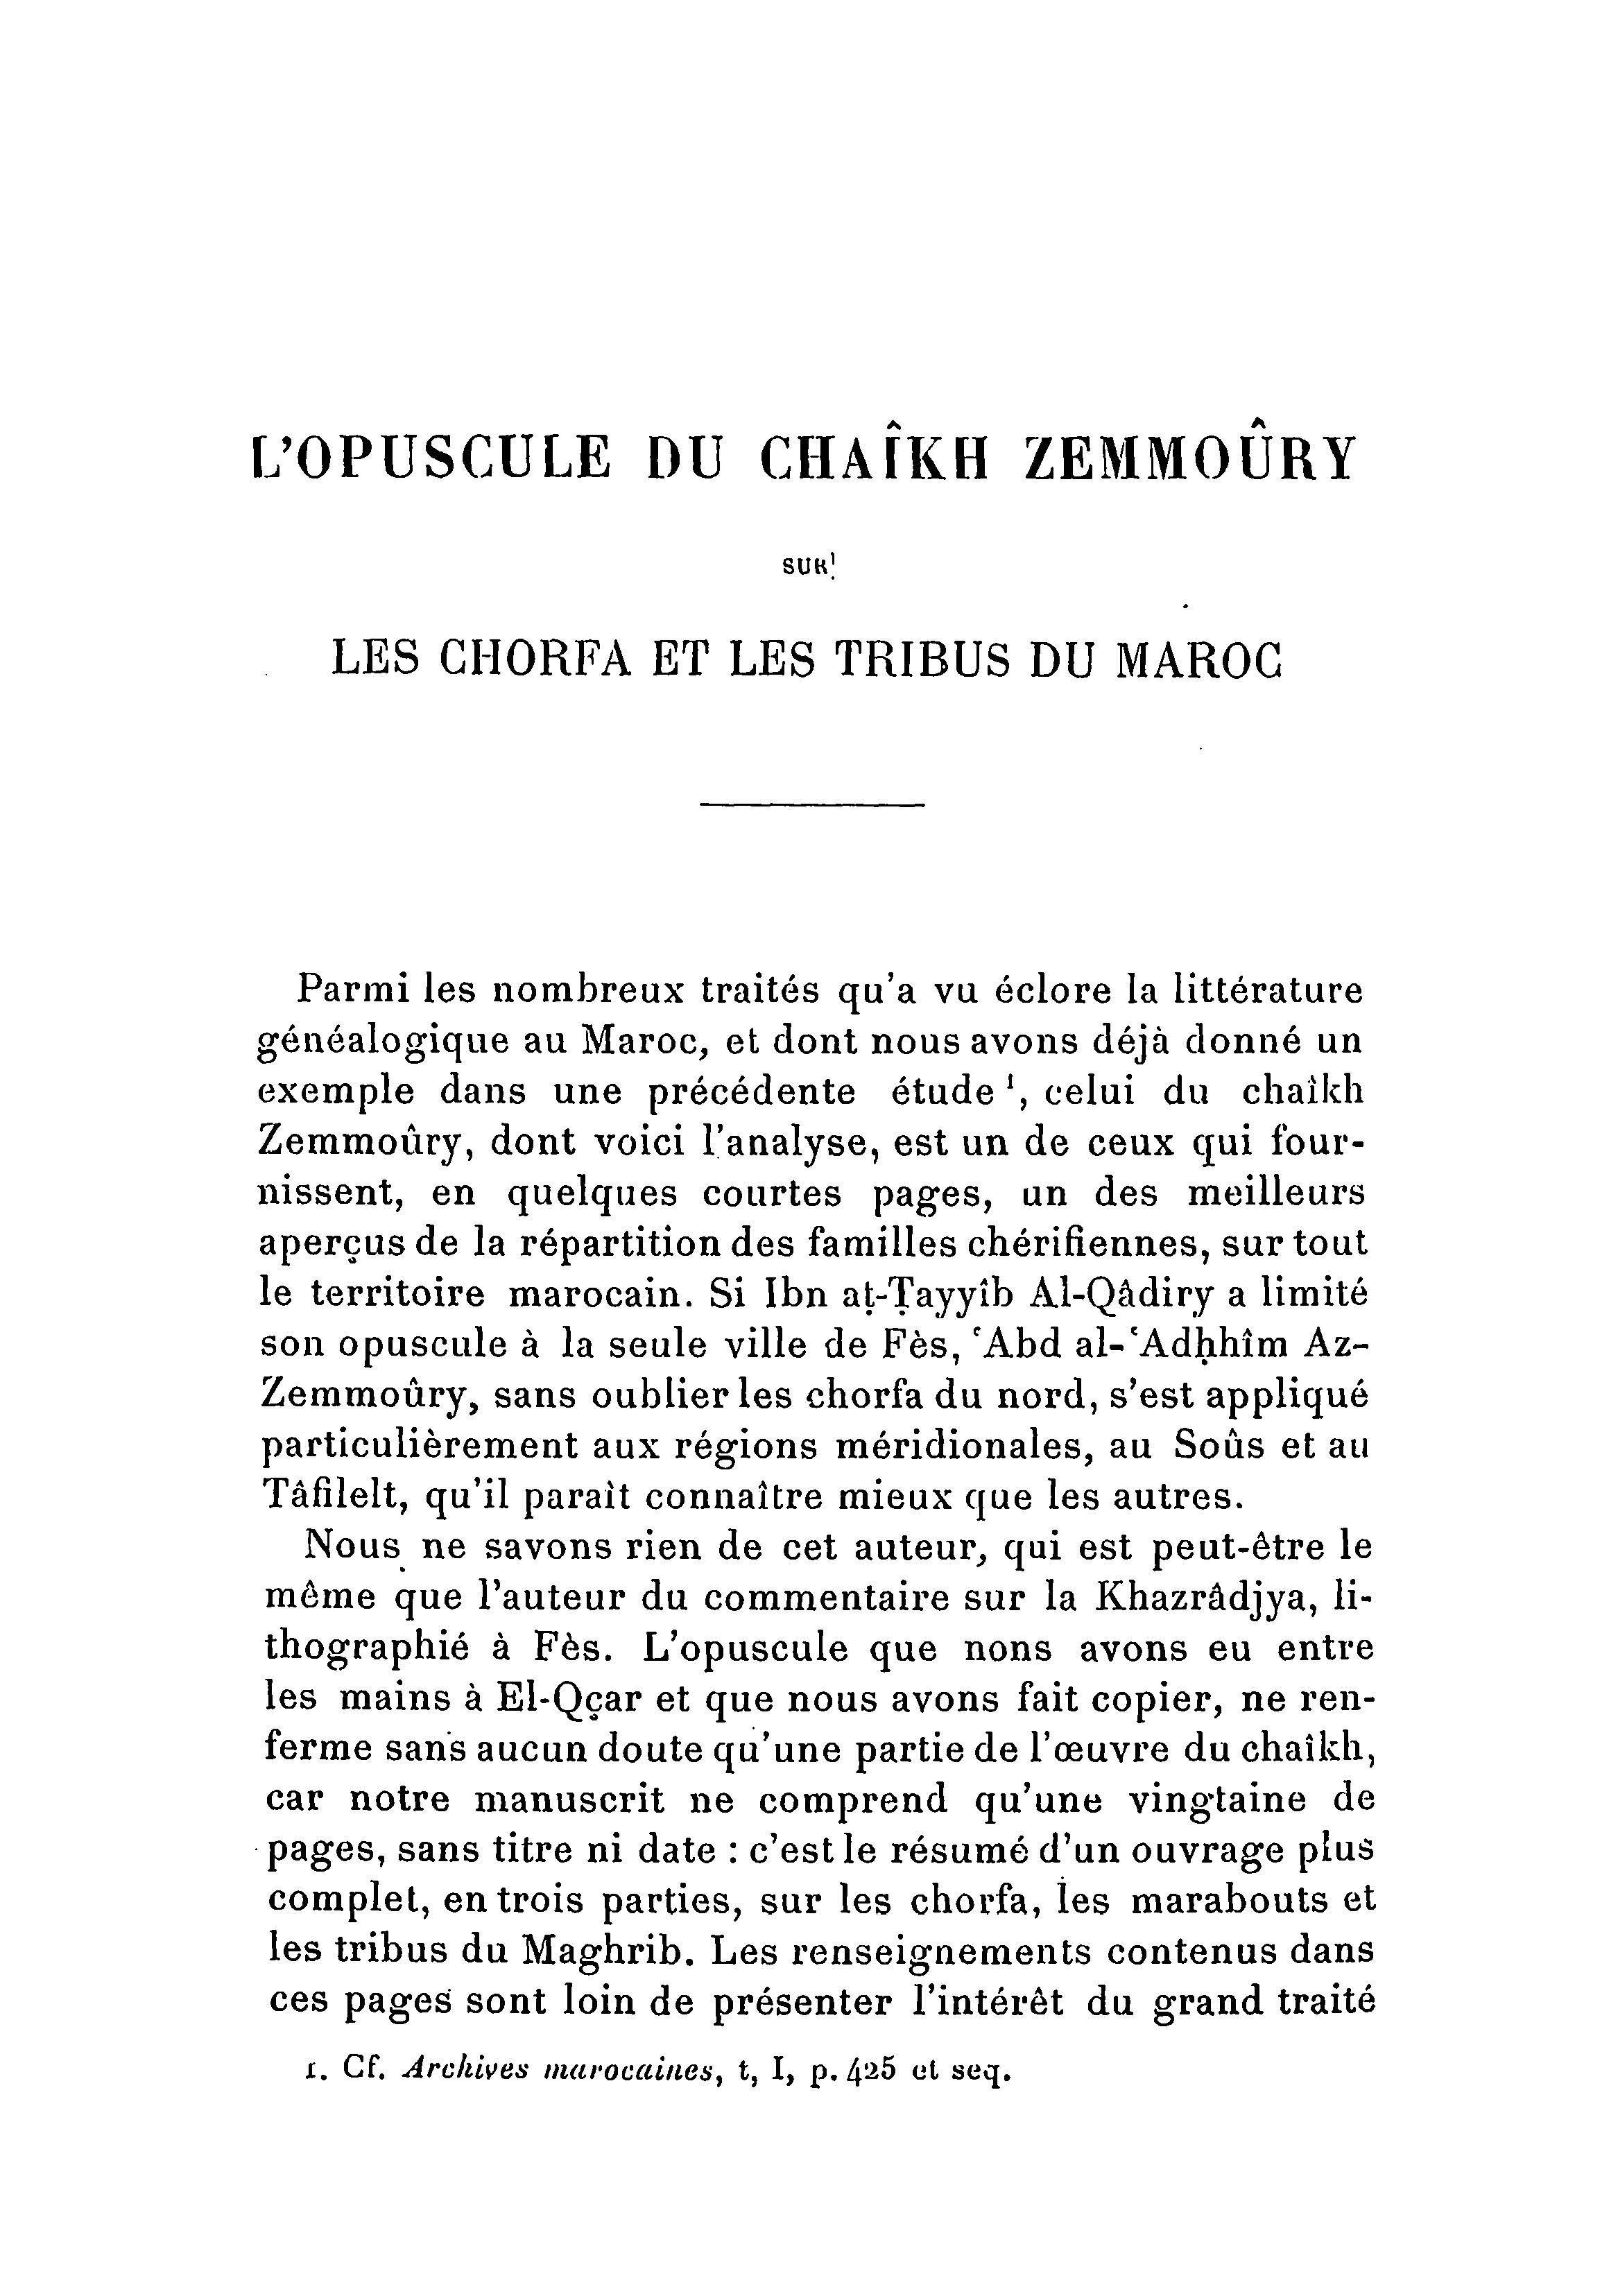 archives_marocaines-vol-2_1_page_433